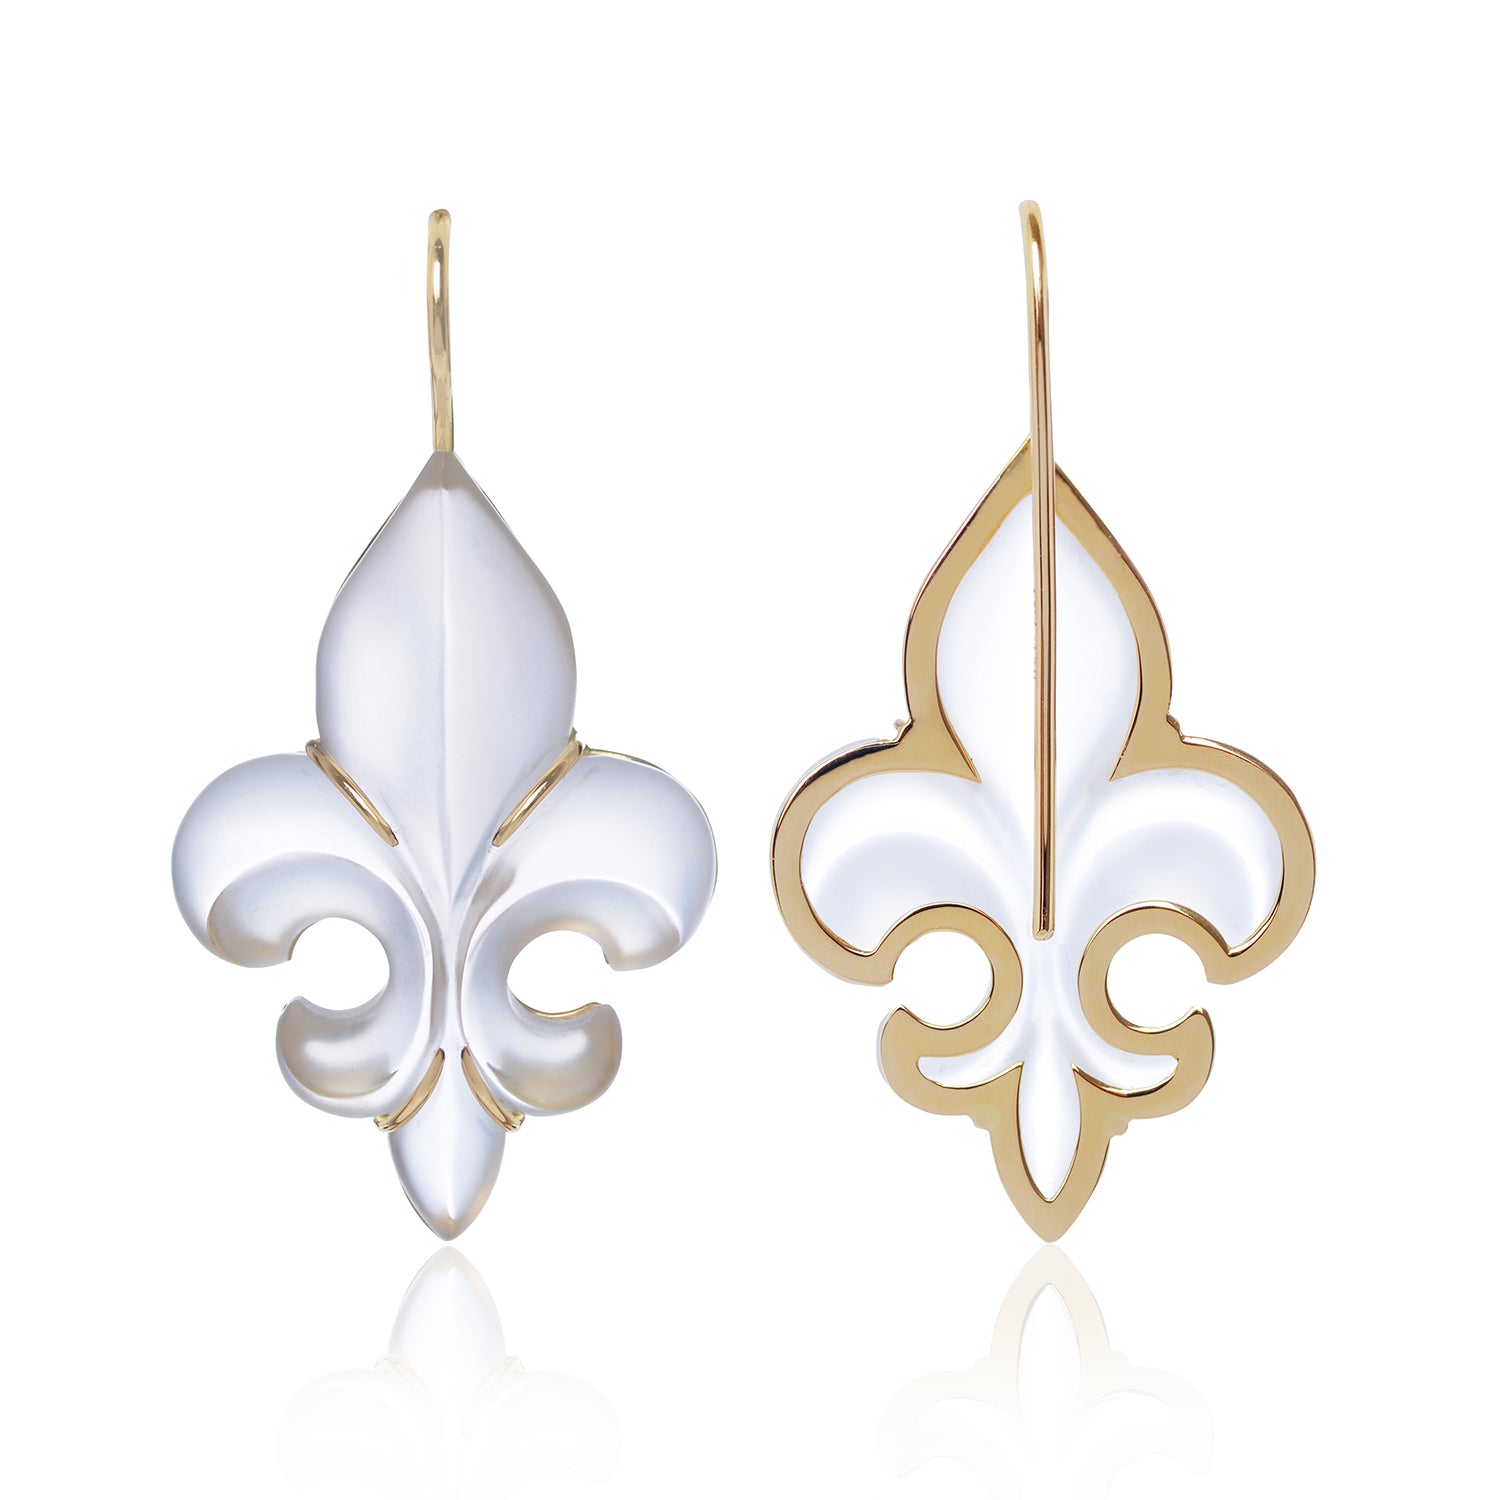 Frosted Fleur des Lys Earrings in 18ct yellow gold back view with gold trimming by McFarlane Fine Jewellery